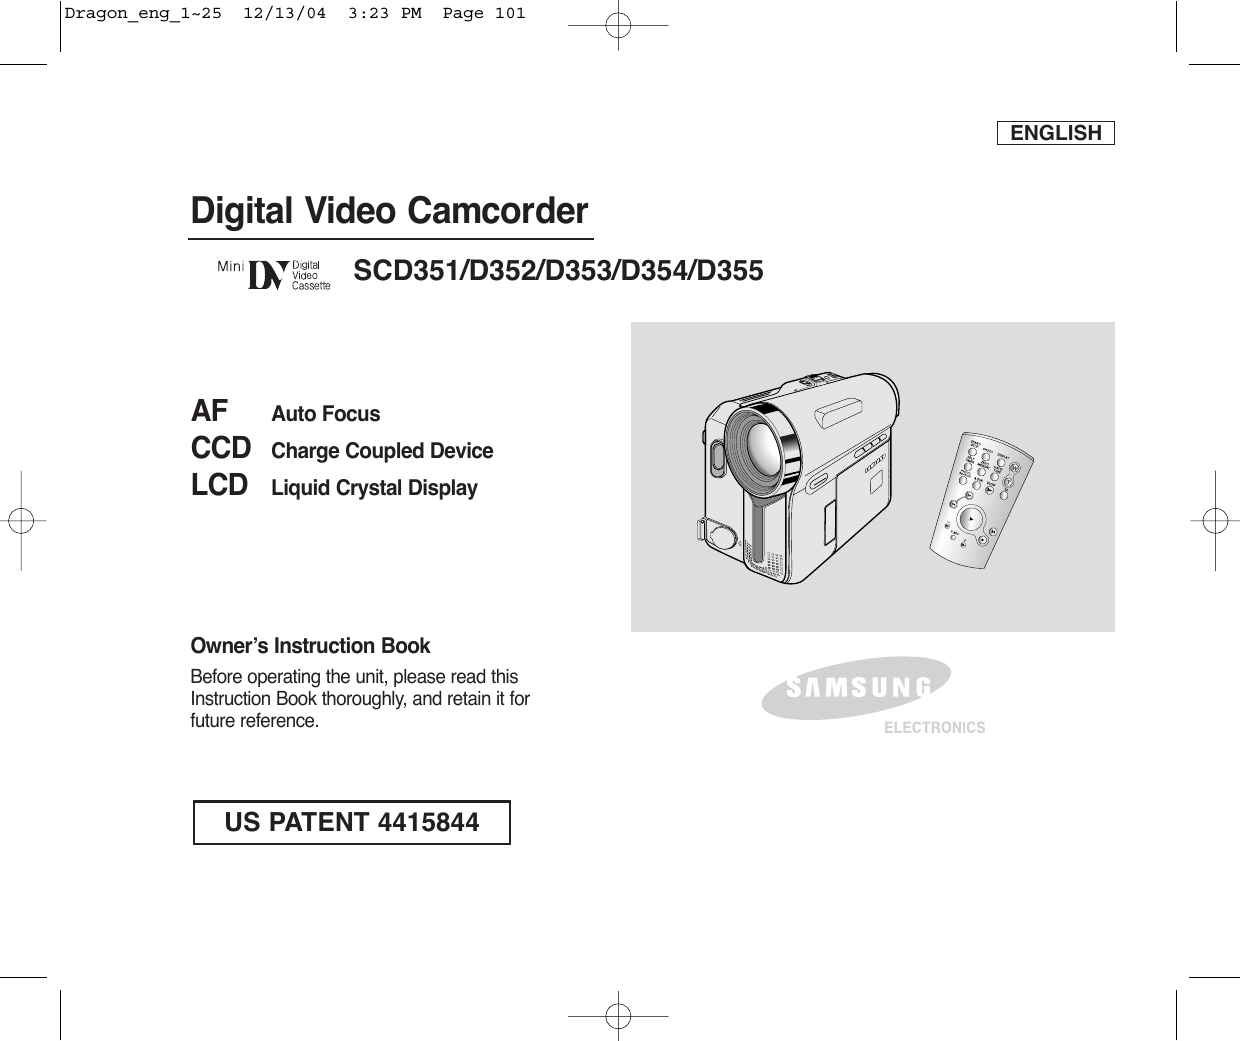 ENGLISHDigital Video CamcorderOwner’s Instruction BookBefore operating the unit, please read thisInstruction Book thoroughly, and retain it forfuture reference. AF Auto FocusCCD Charge Coupled DeviceLCD Liquid Crystal DisplaySCD351/D352/D353/D354/D355US PATENT 4415844Dragon_eng_1~25  12/13/04  3:23 PM  Page 101